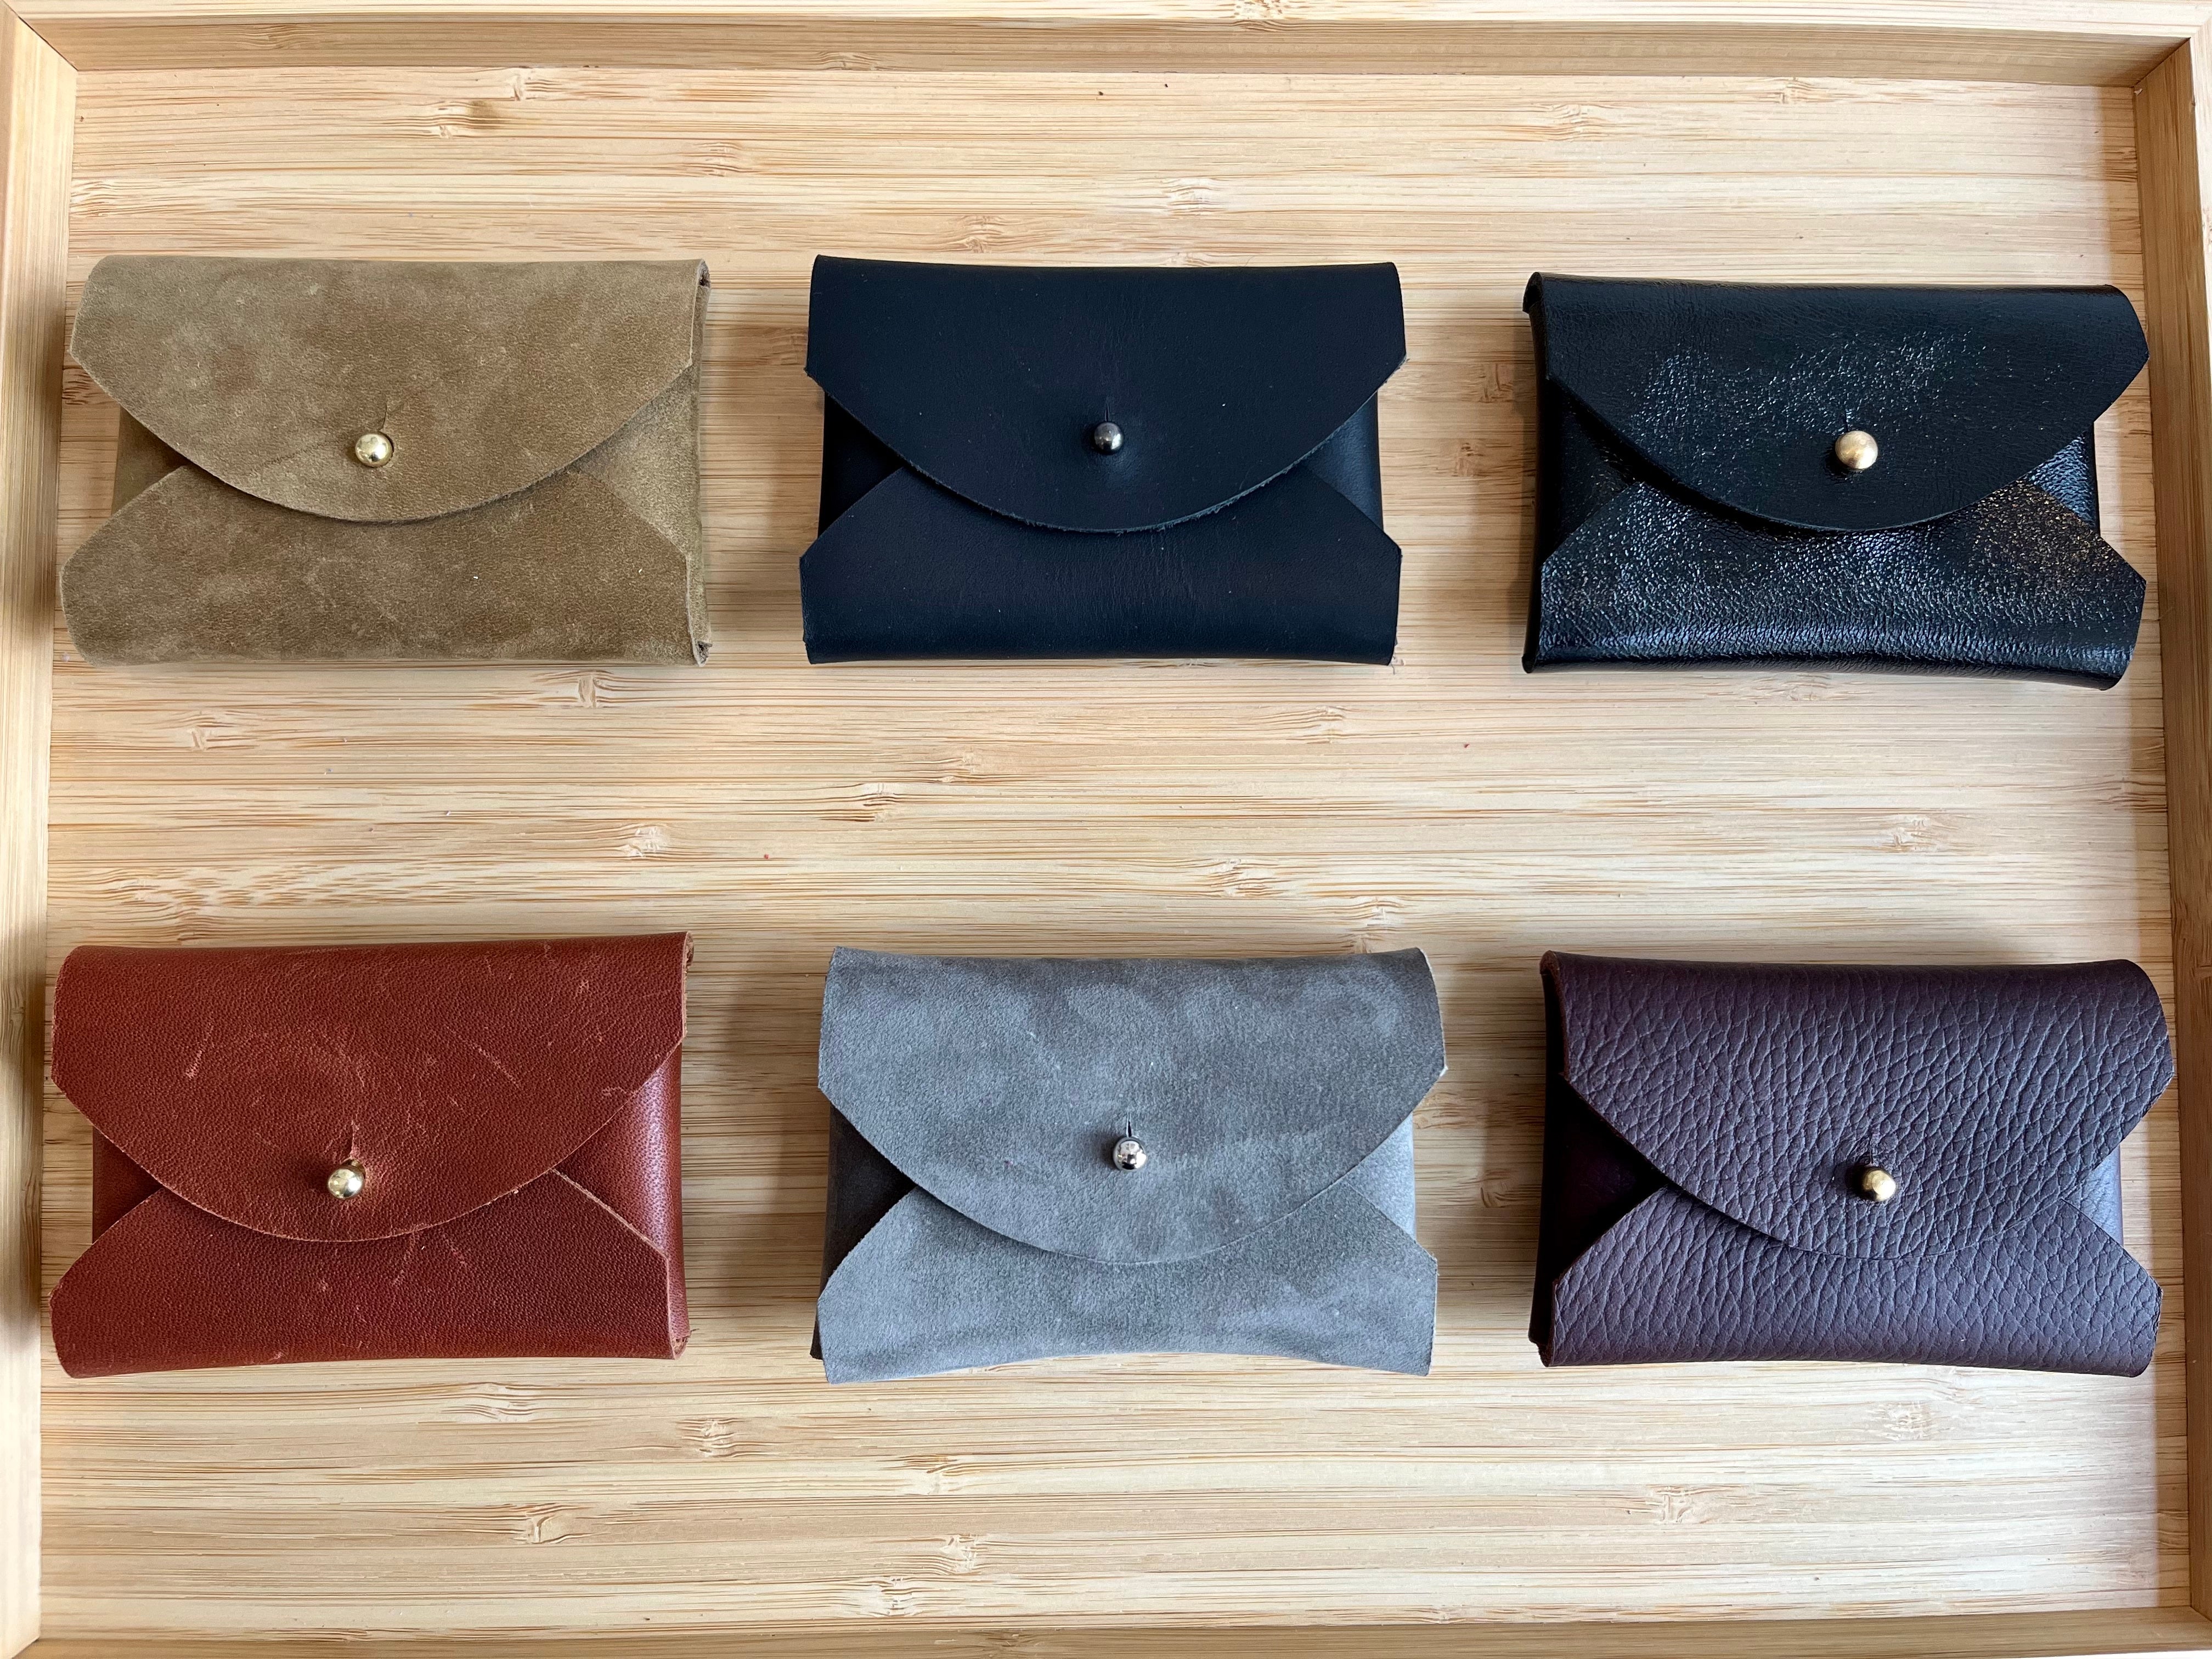 How to Make a Leather Envelope Wallet